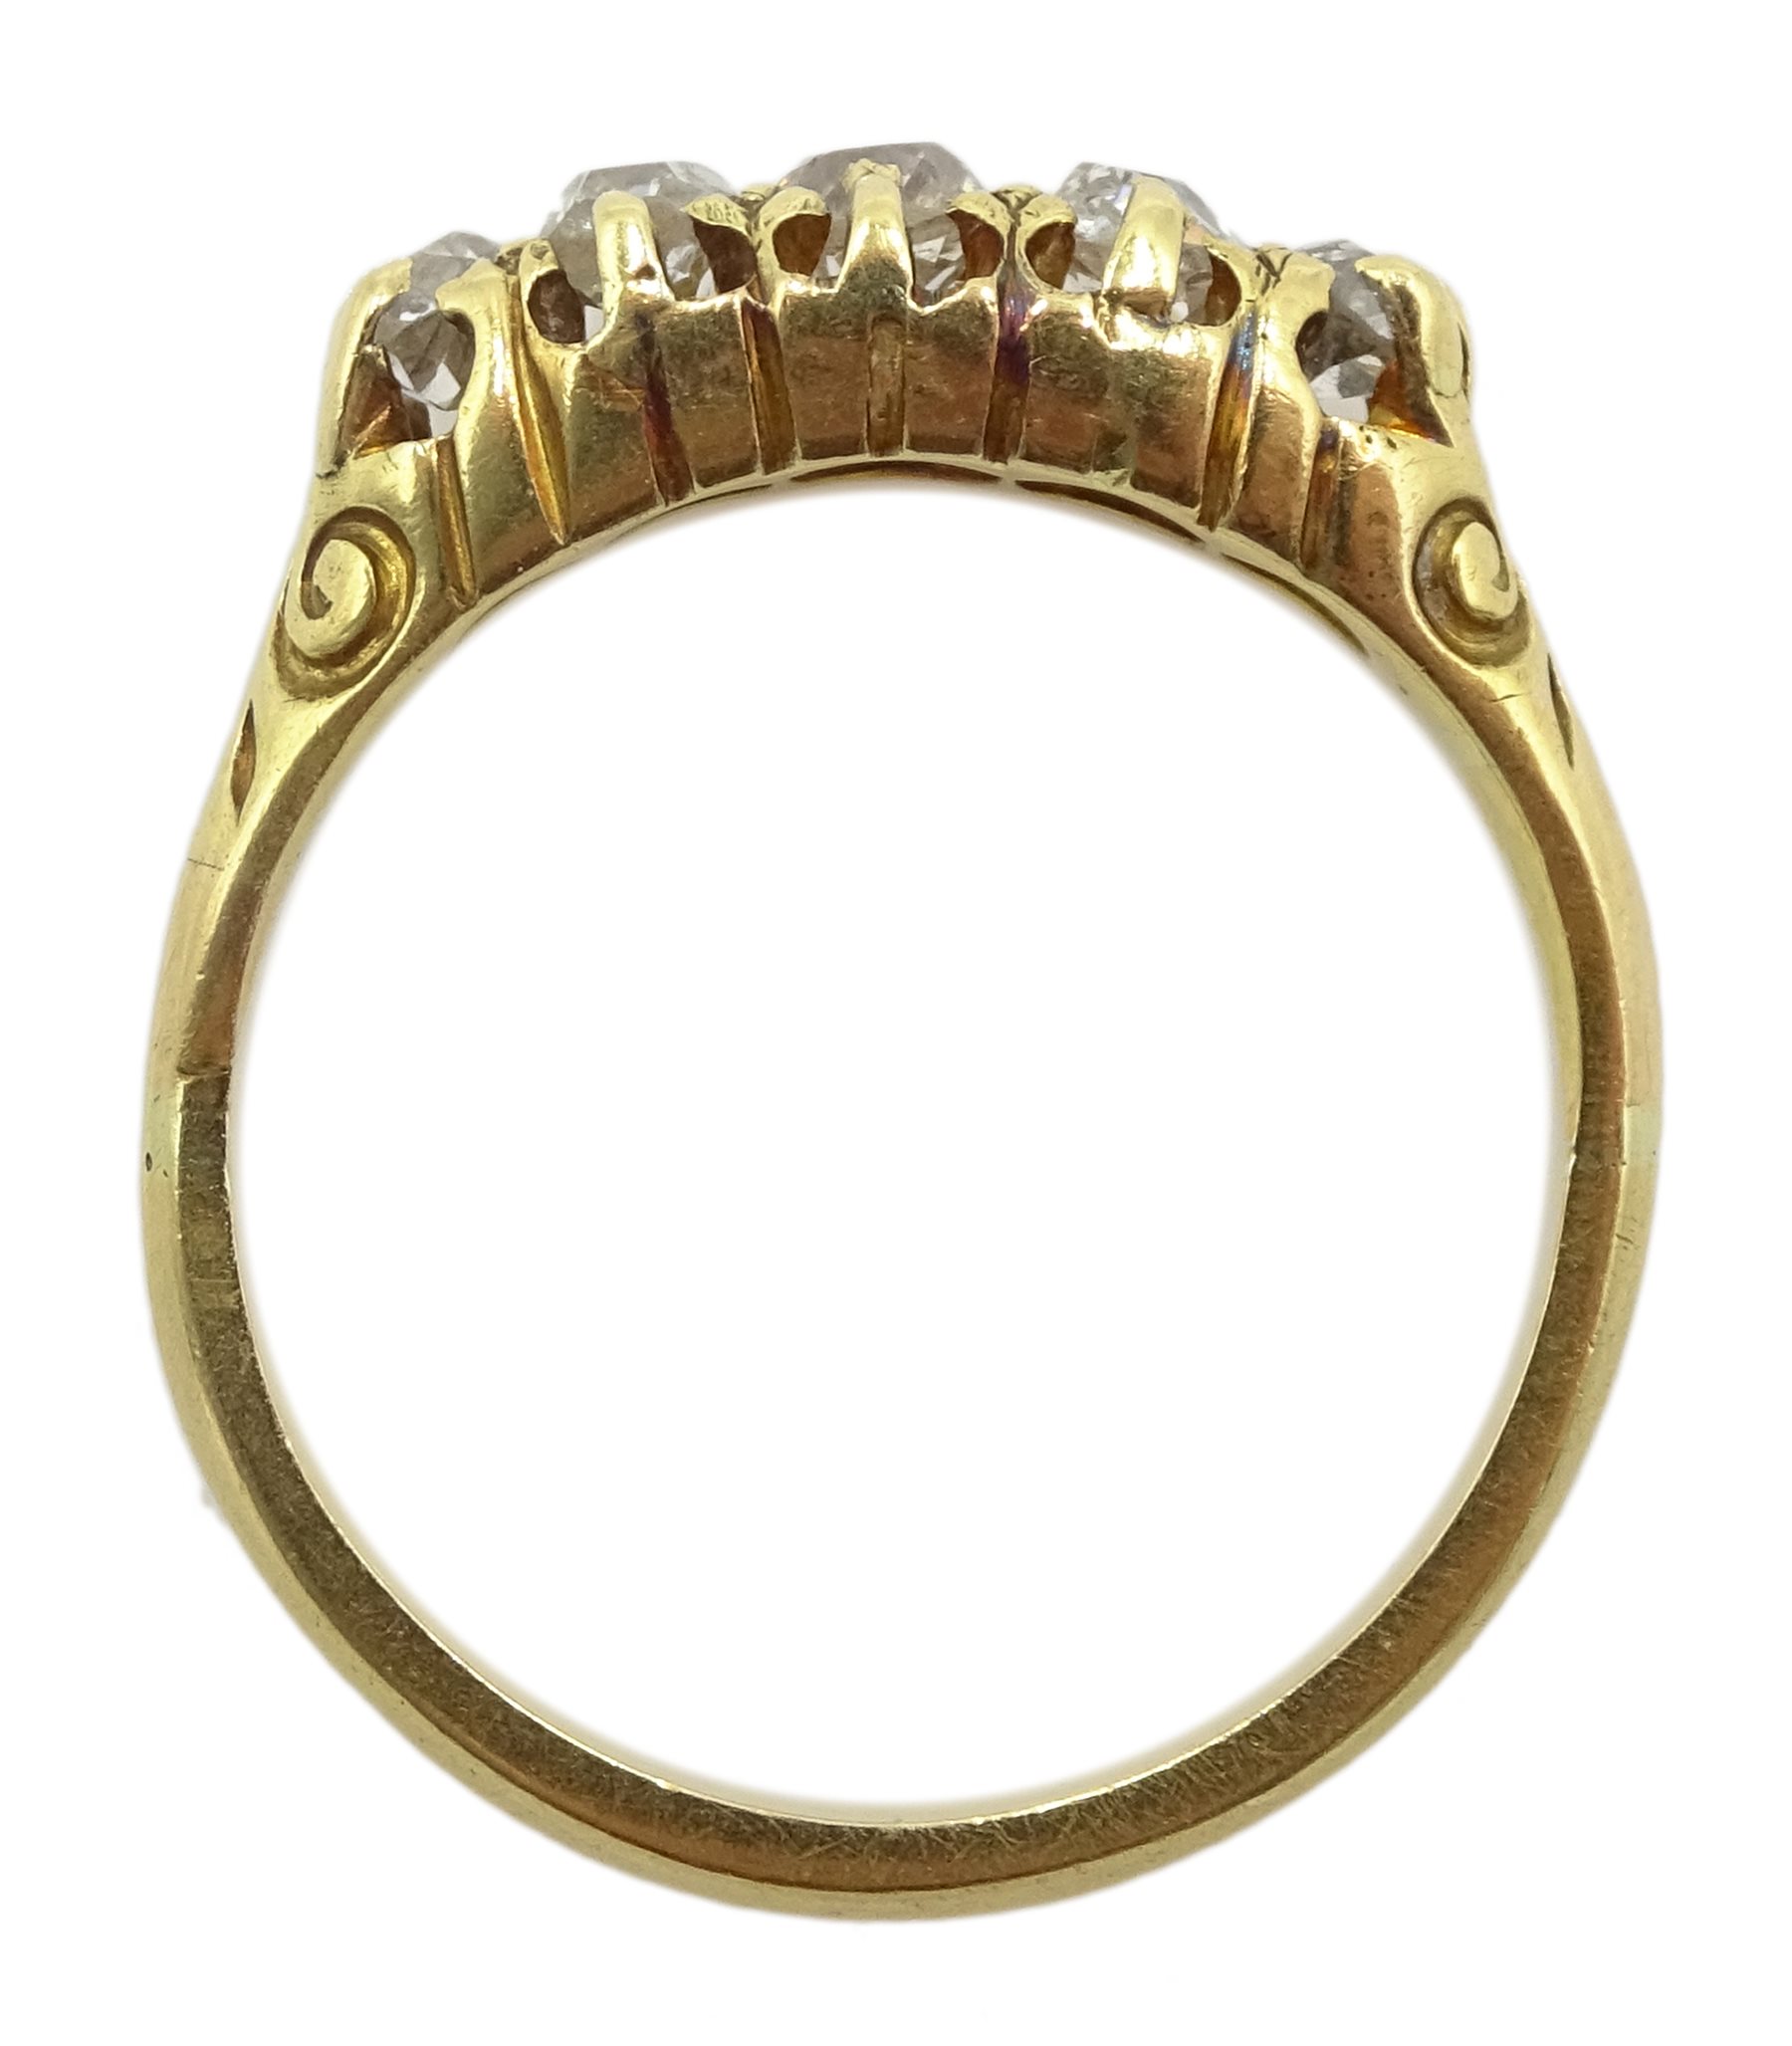 18ct gold five stone old cut diamond ring, total diamond weight approx 0.40 carat - Image 4 of 8